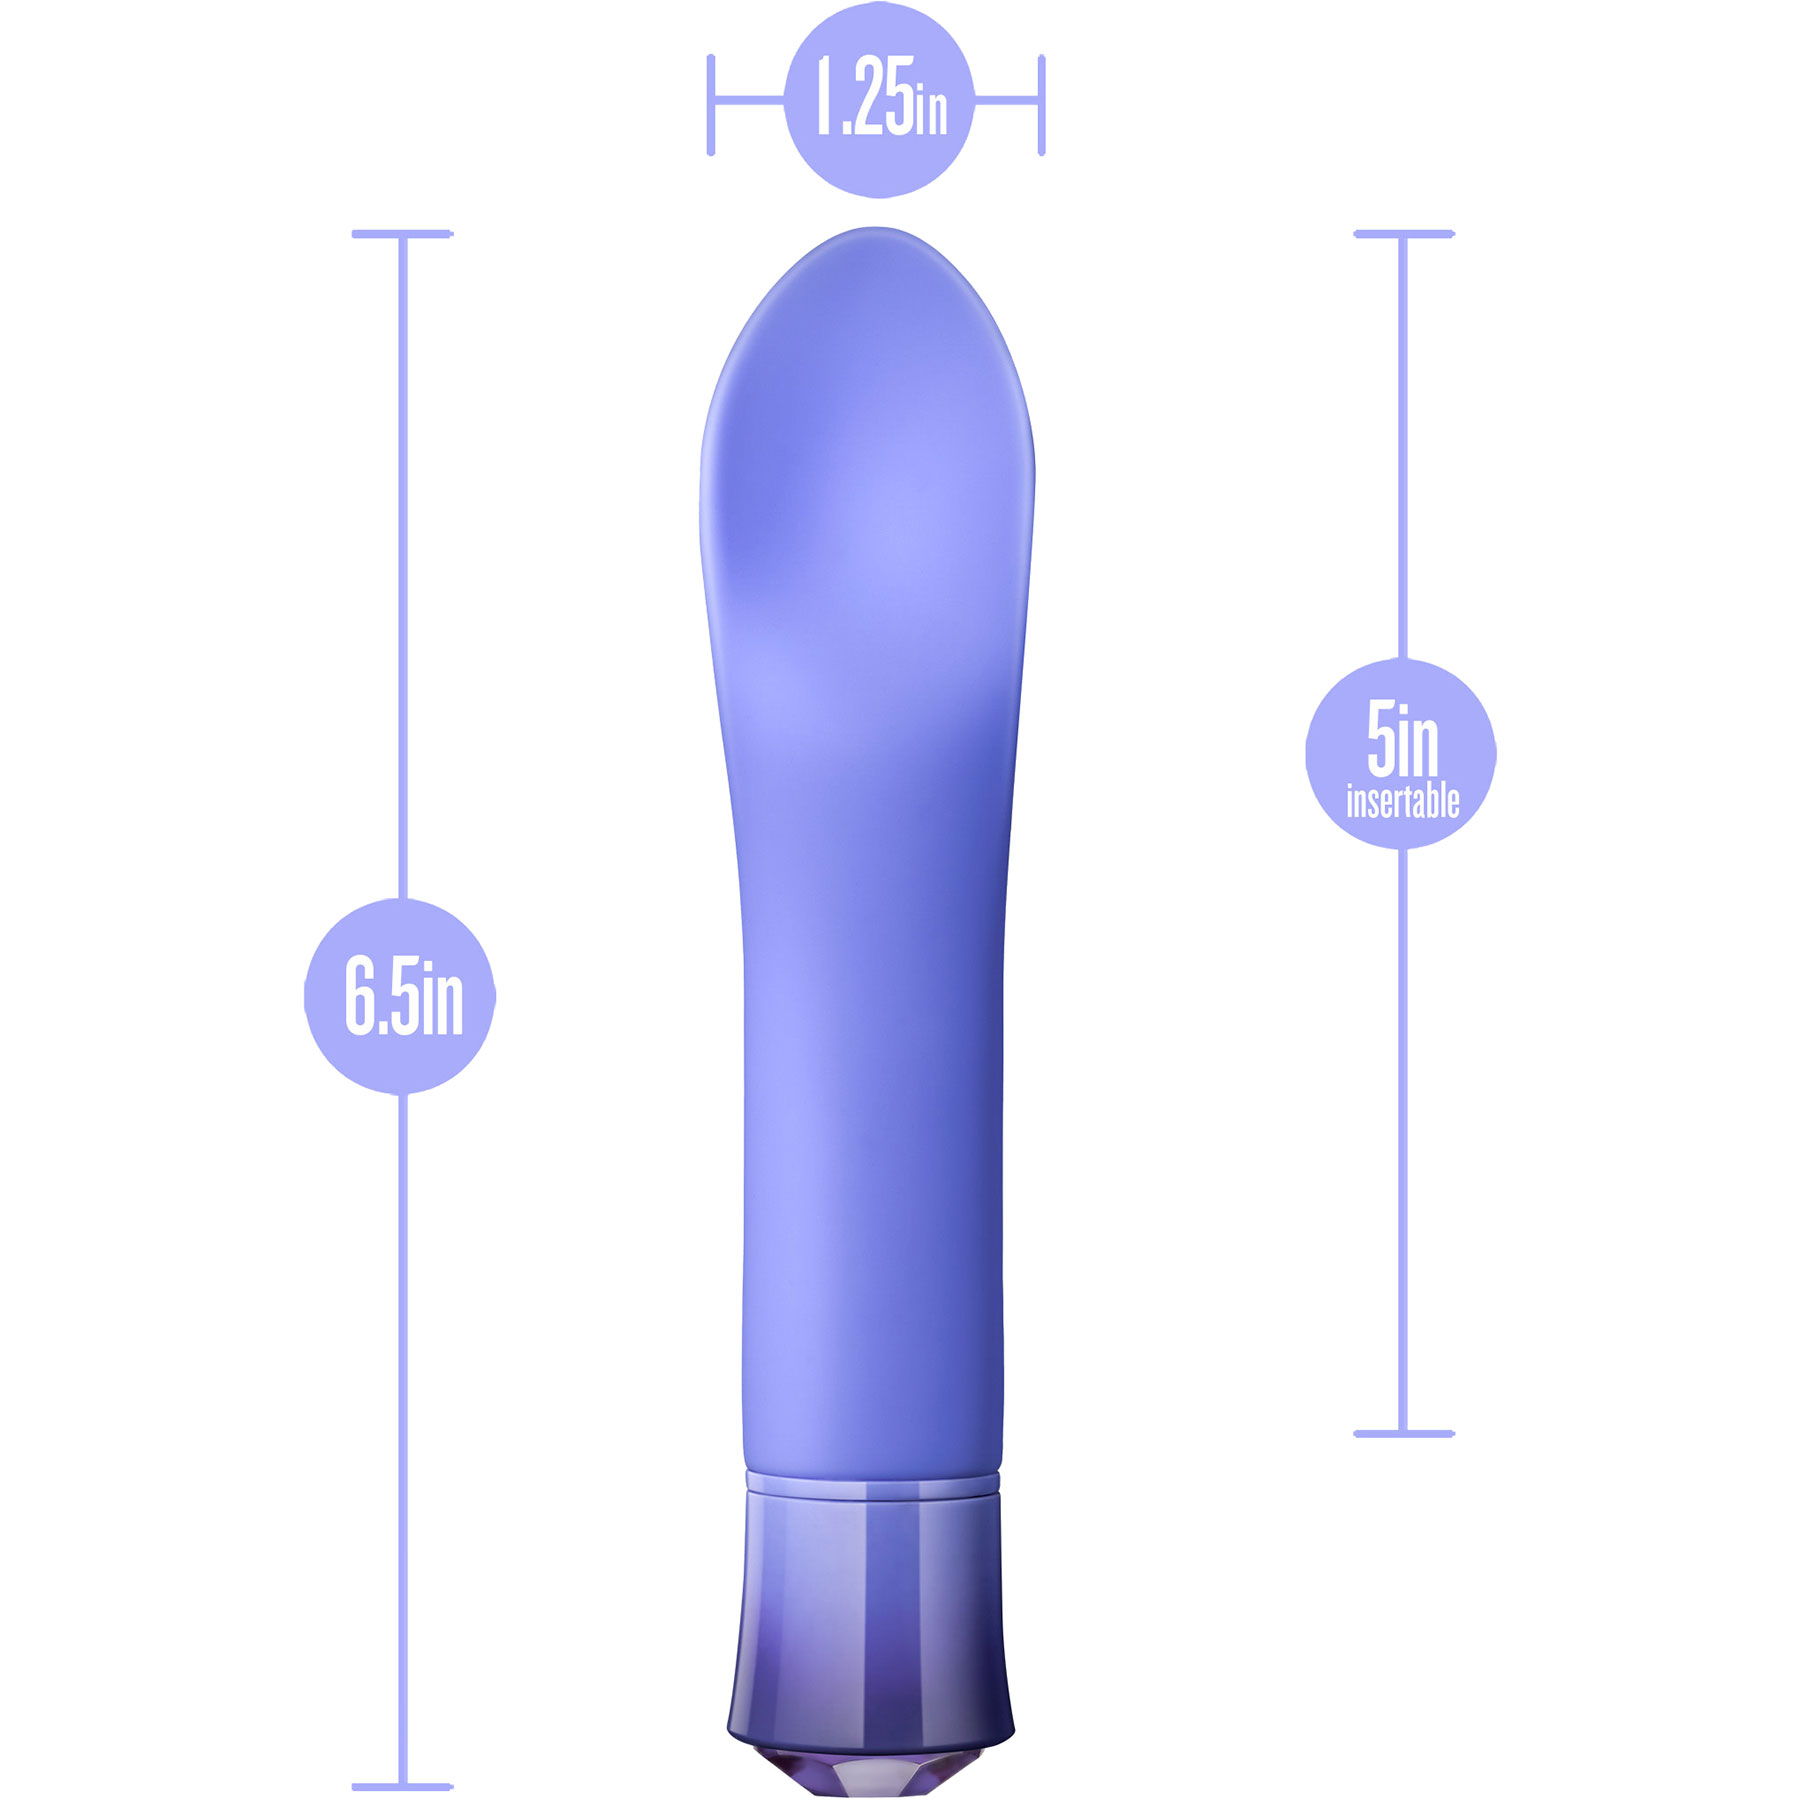 Oh My Gem Enrapture Rechargeable Waterproof Silicone Warming Clitoral Vibrator - Measurements